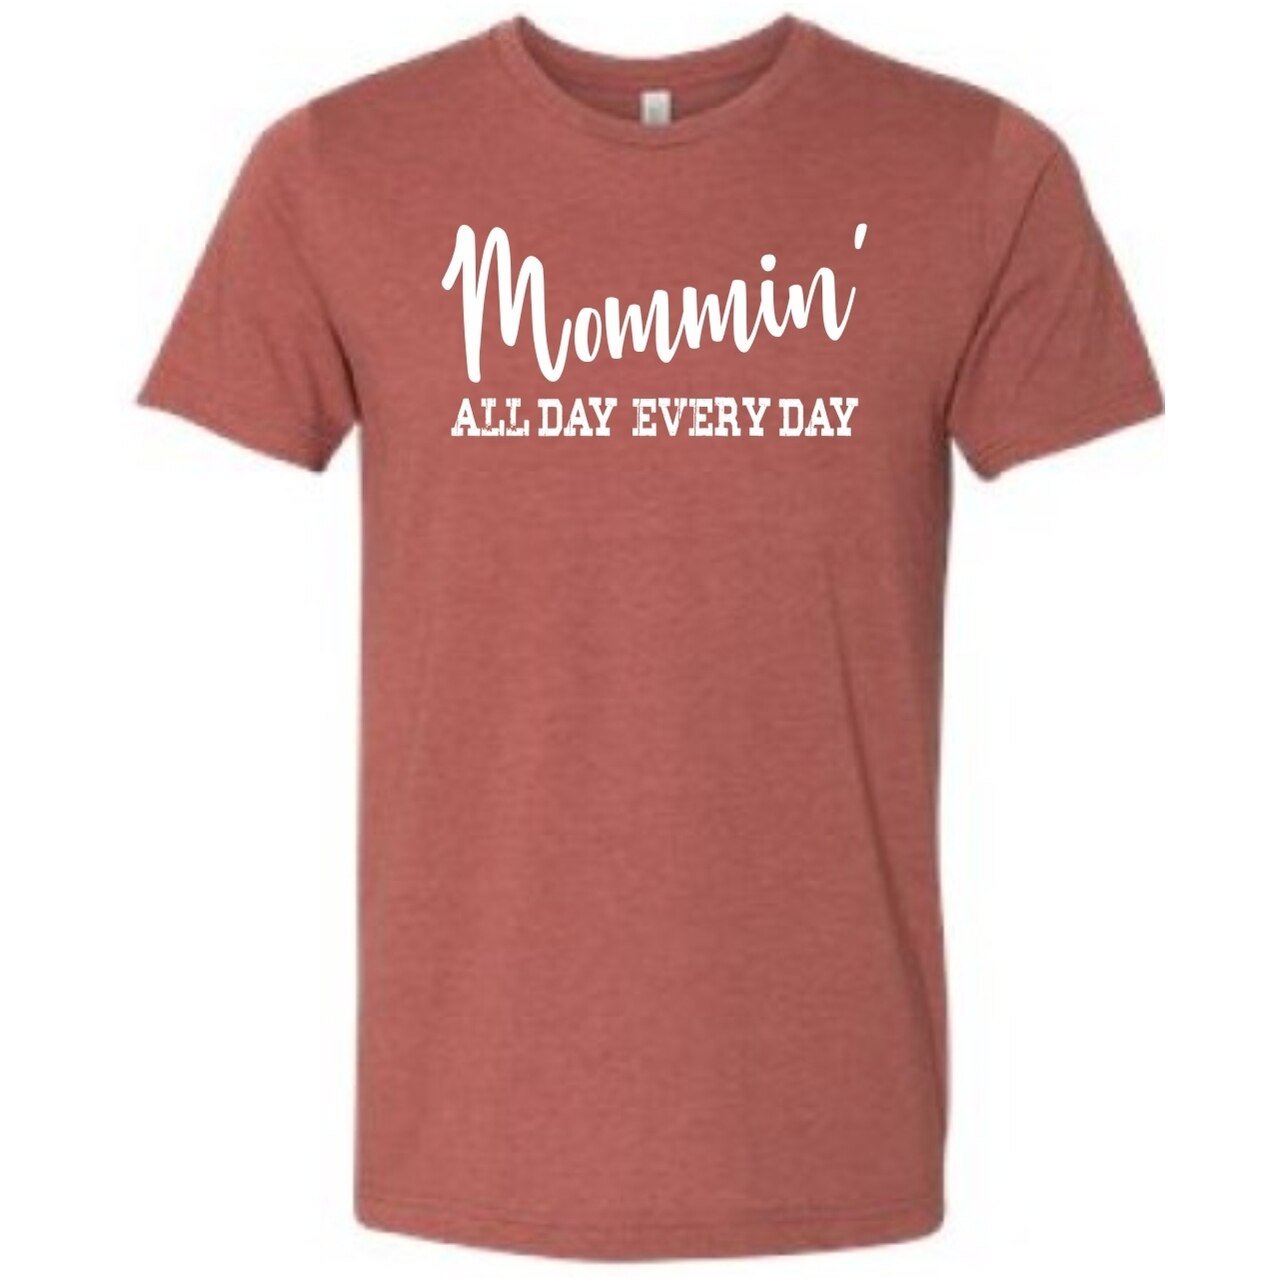 Mommin' All Day Every Day Tee - The Graphic Tee